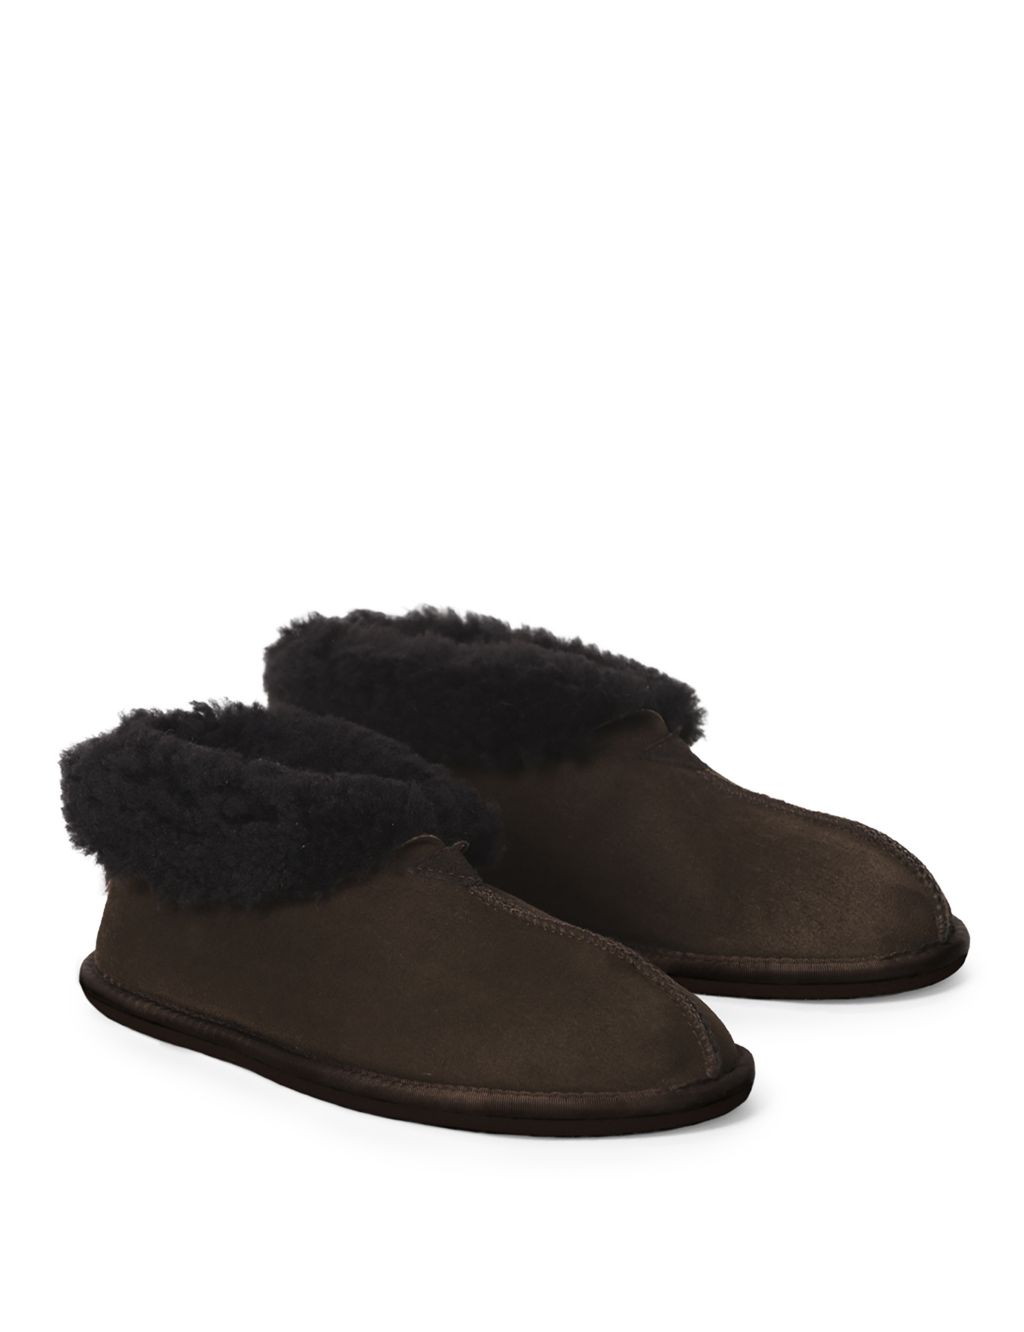 Suede Slipper Boots image 1